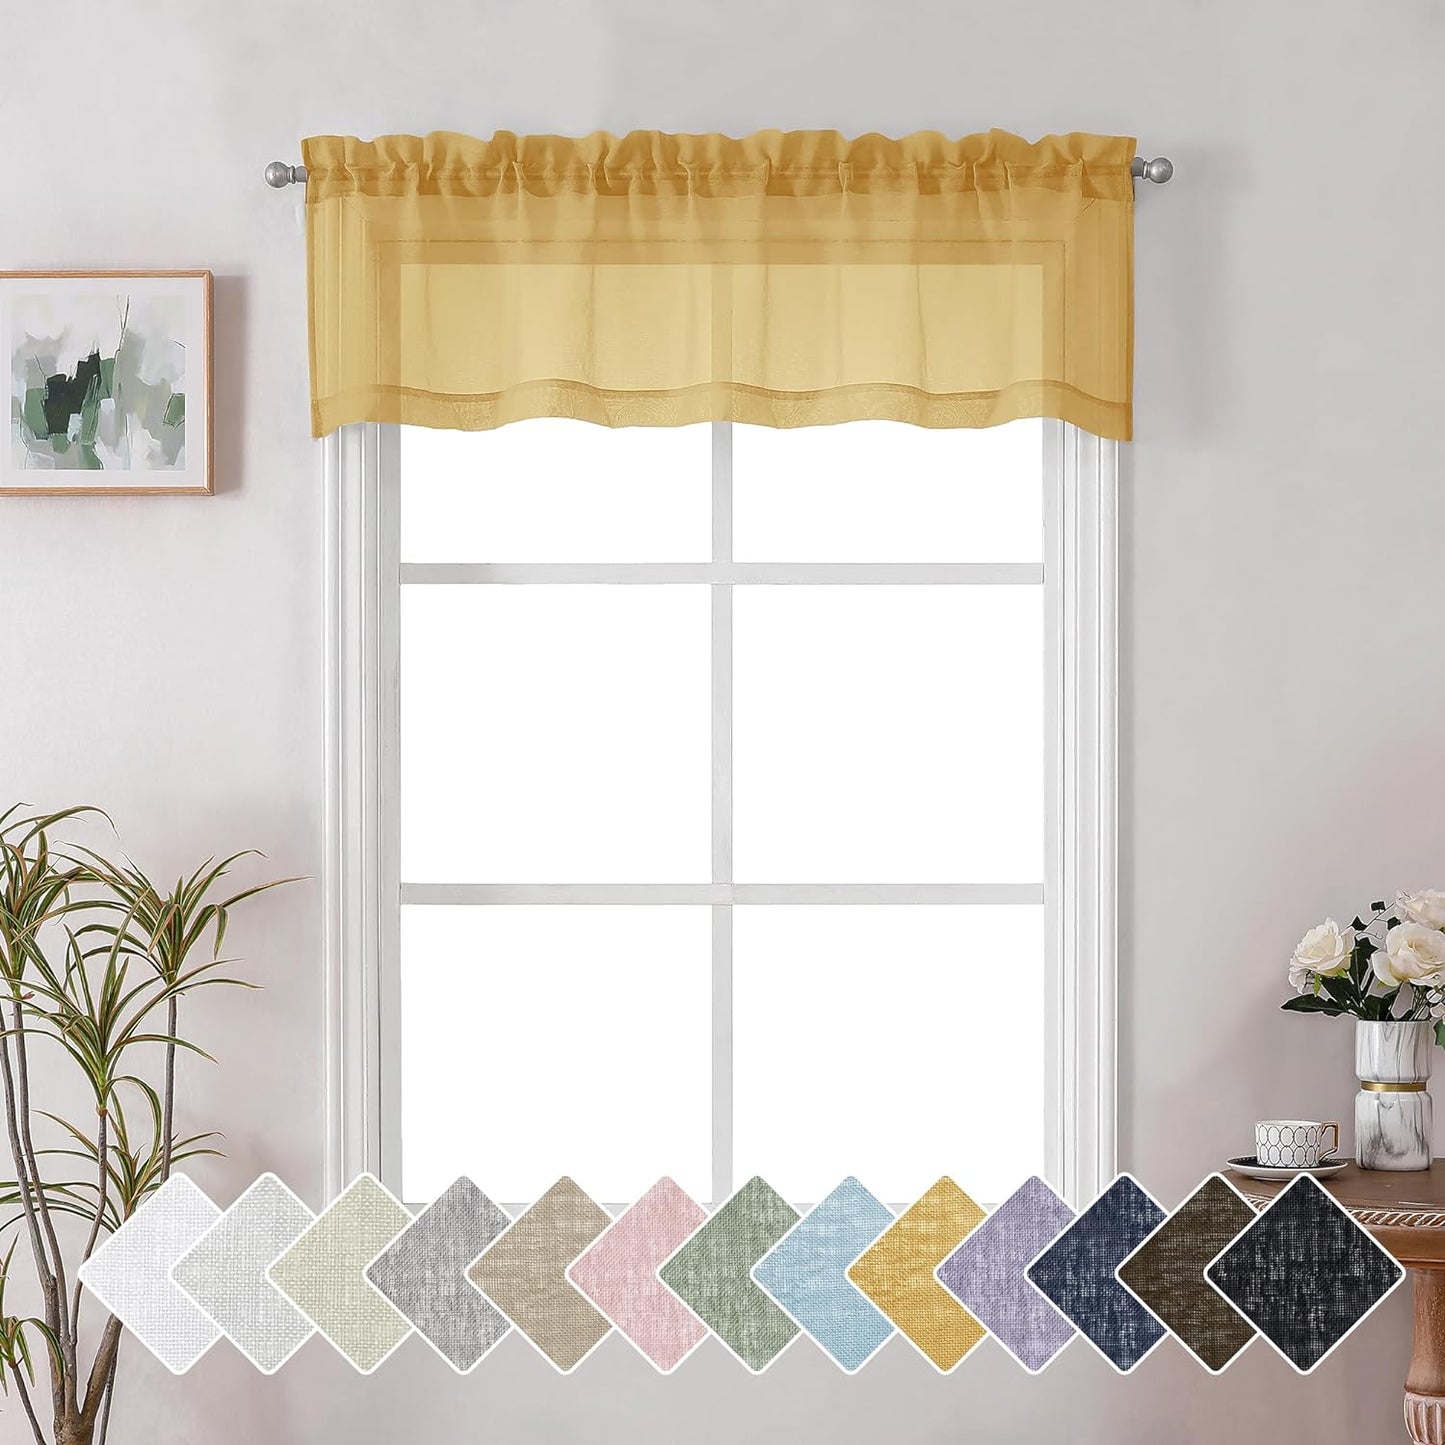 Lecloud Doris Faux Linen Sheer Grey Valance Curtains 14 Inches Length, Cafe Kitchen Bedroom Living Room Gauzy Silver Grey Curtain for Small Window, Slub Light Gray Valance Dual Rod Pockets 60X14 Inch  Lecloud Gold 60 W X 14 L 